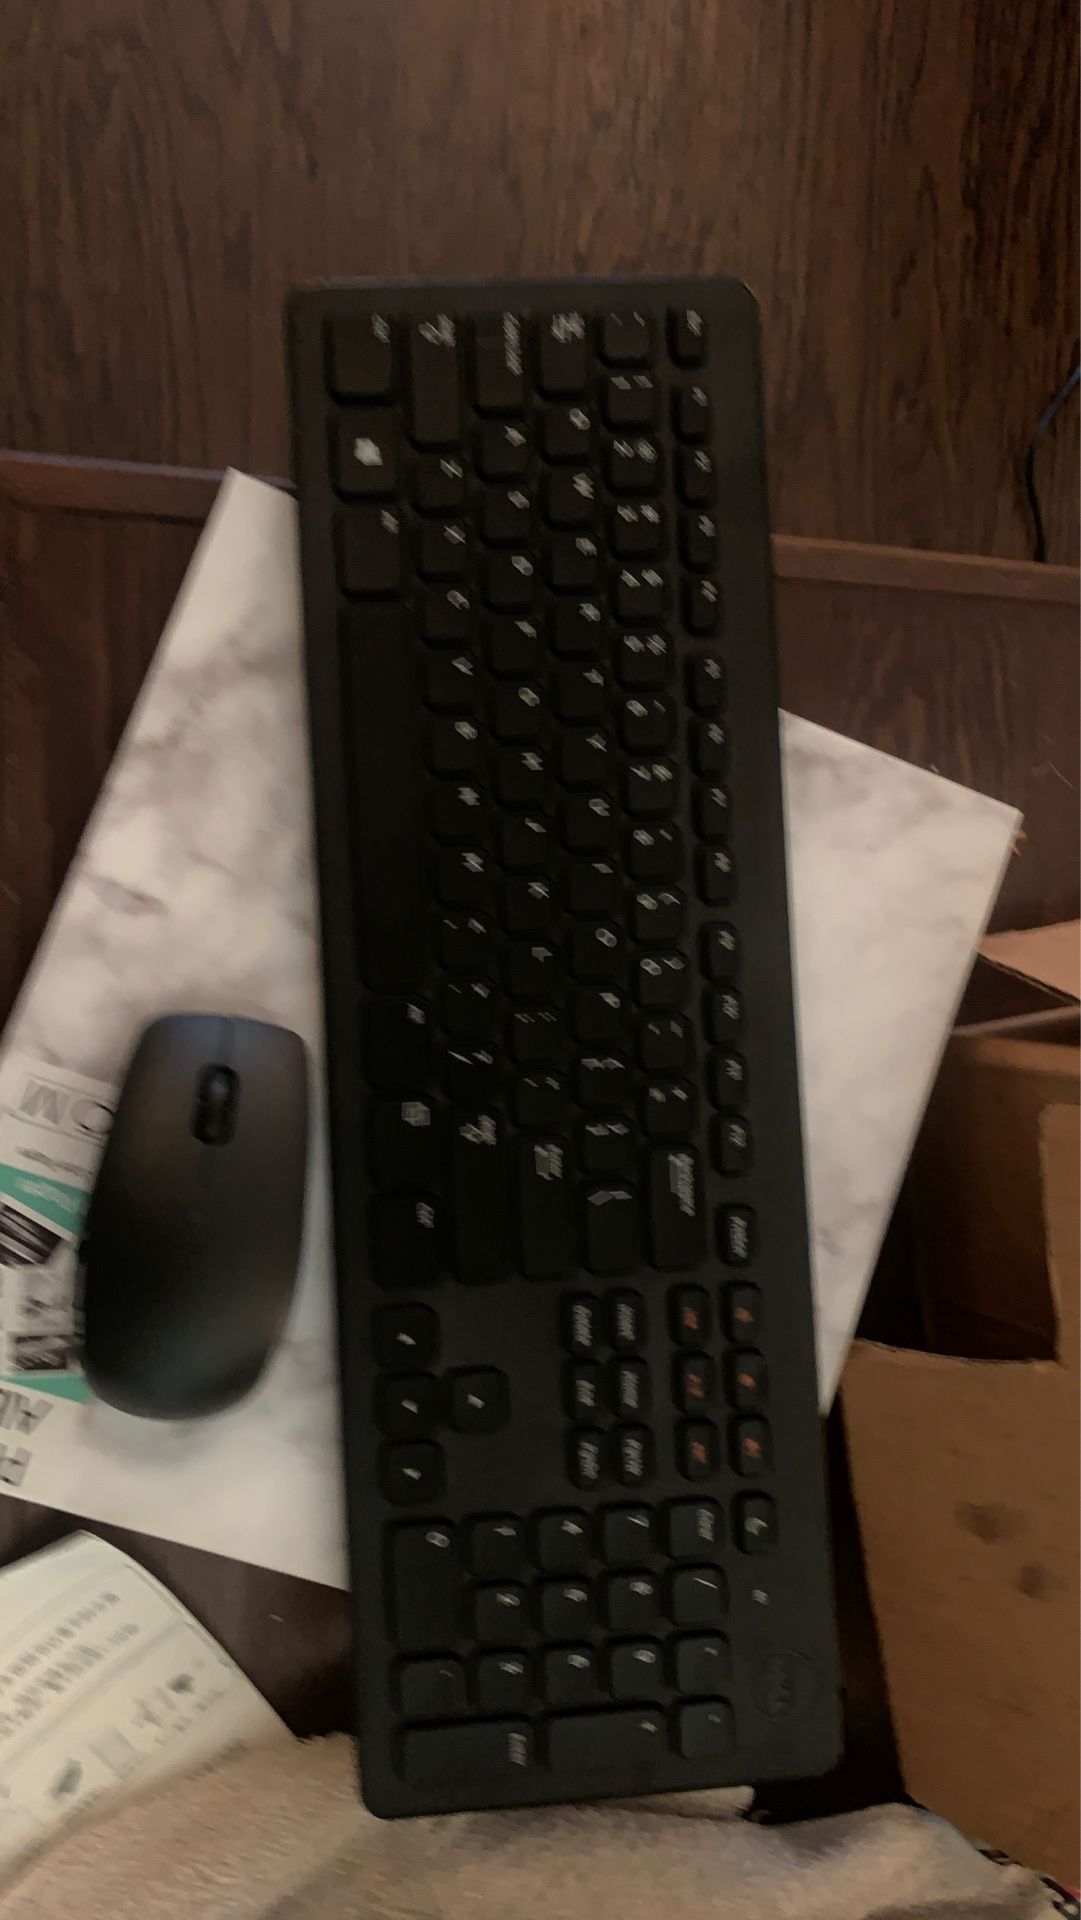 Wireless Keyboard and Mouse